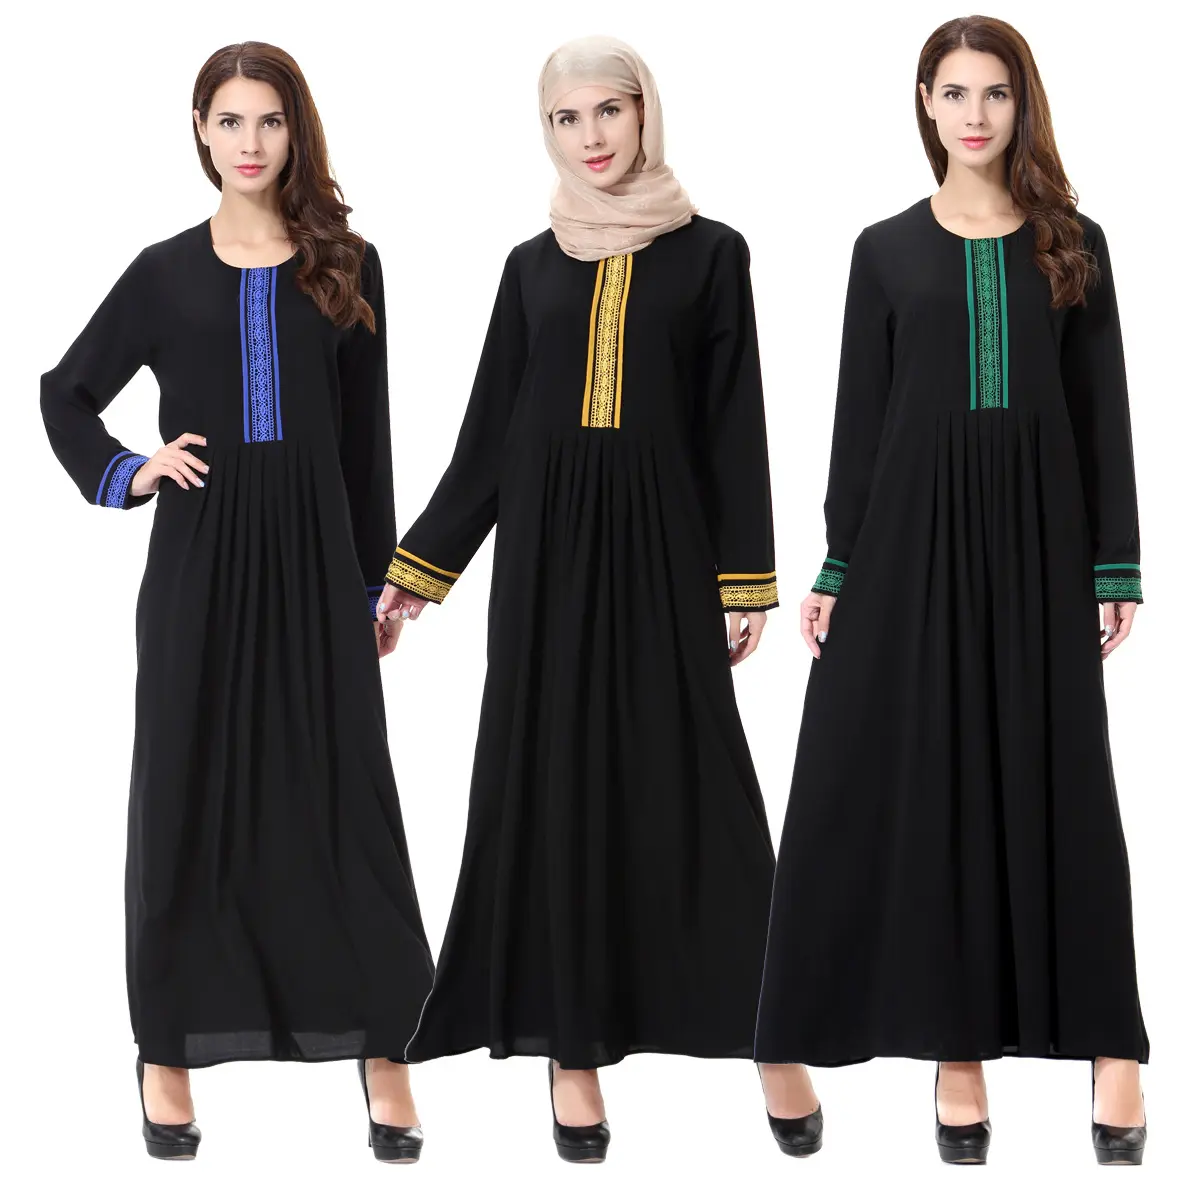 Muslim Middle East luxury high quality Light and breathable women's dress new design hot selling long dress Turkish robe abaya